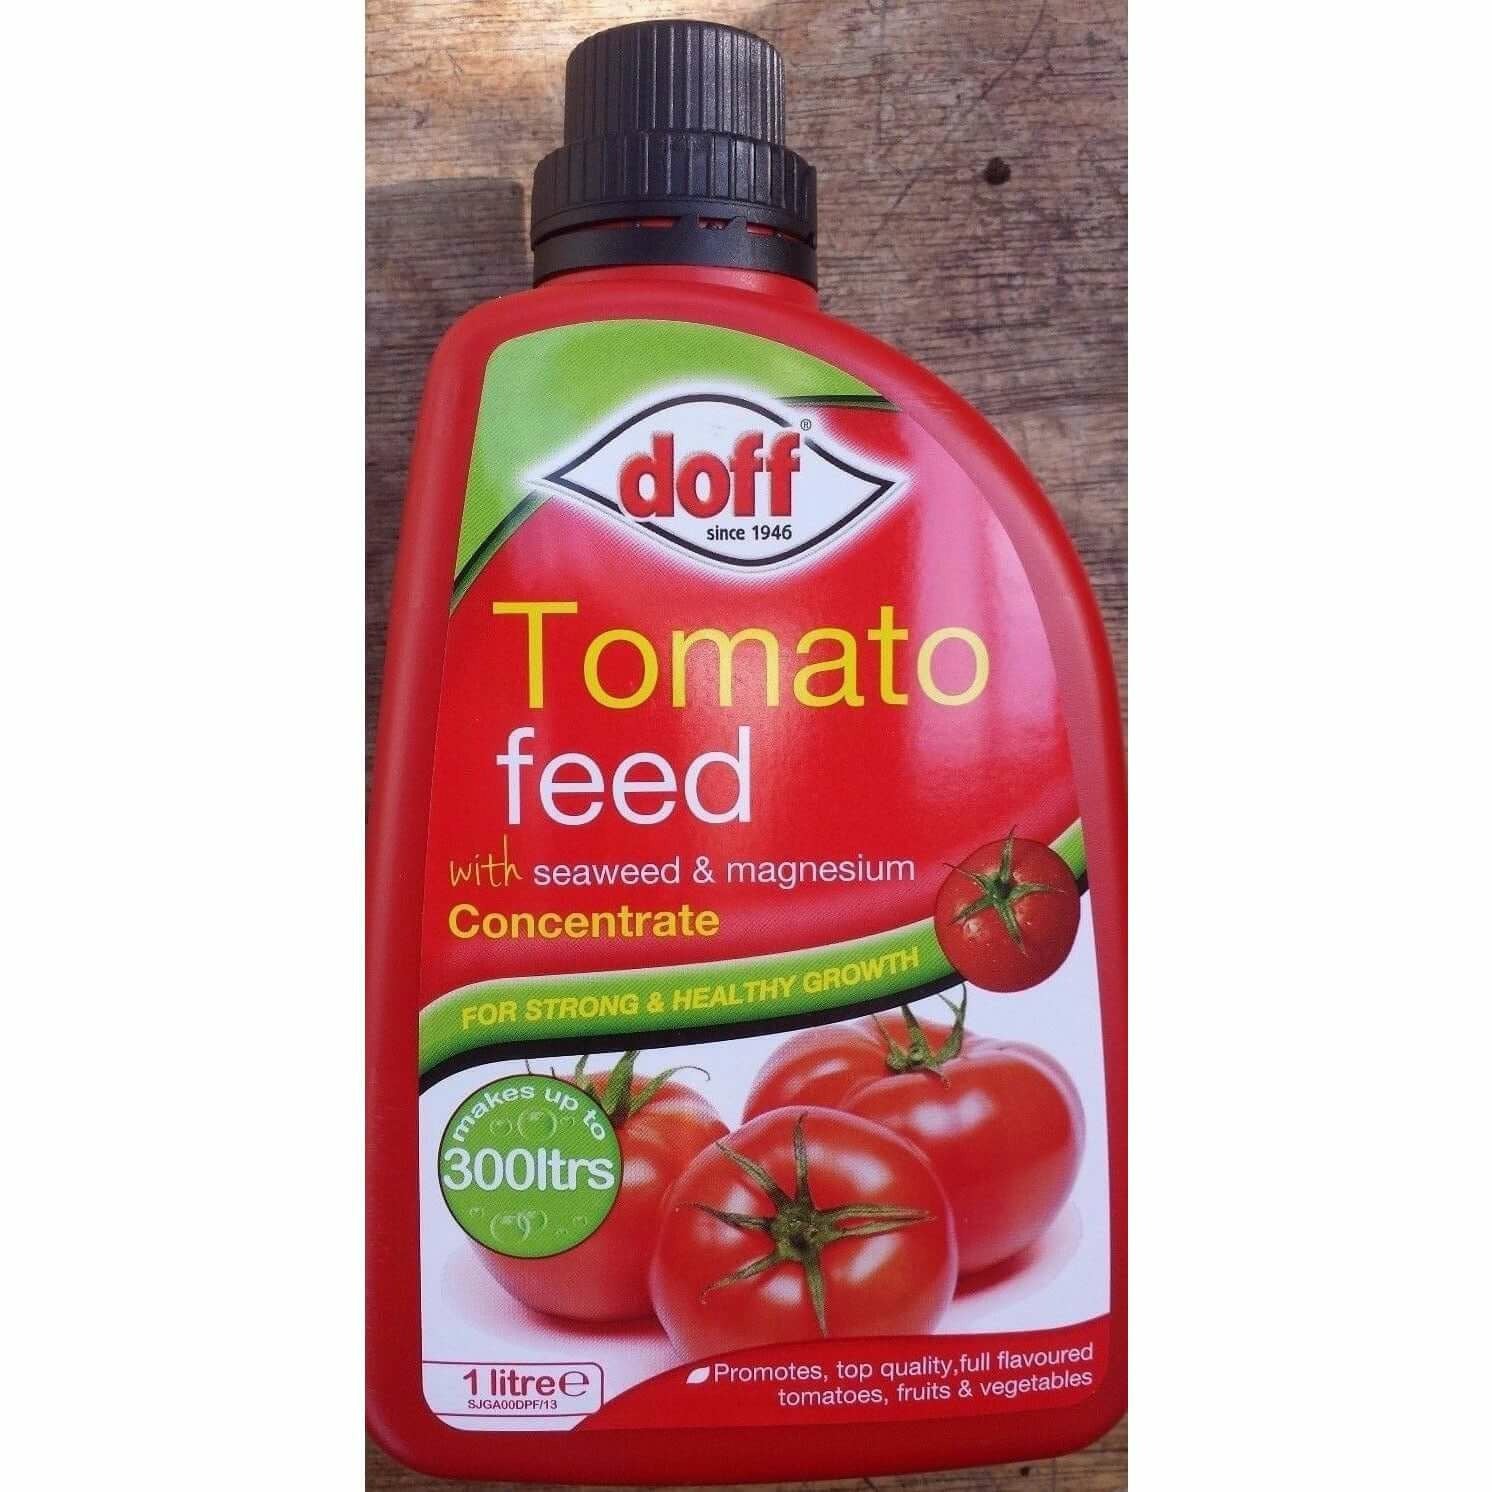 Doff Tomato Feed Concentrate with seaweed and magnesium 1 ltr  from Gardening Requisites 5.49